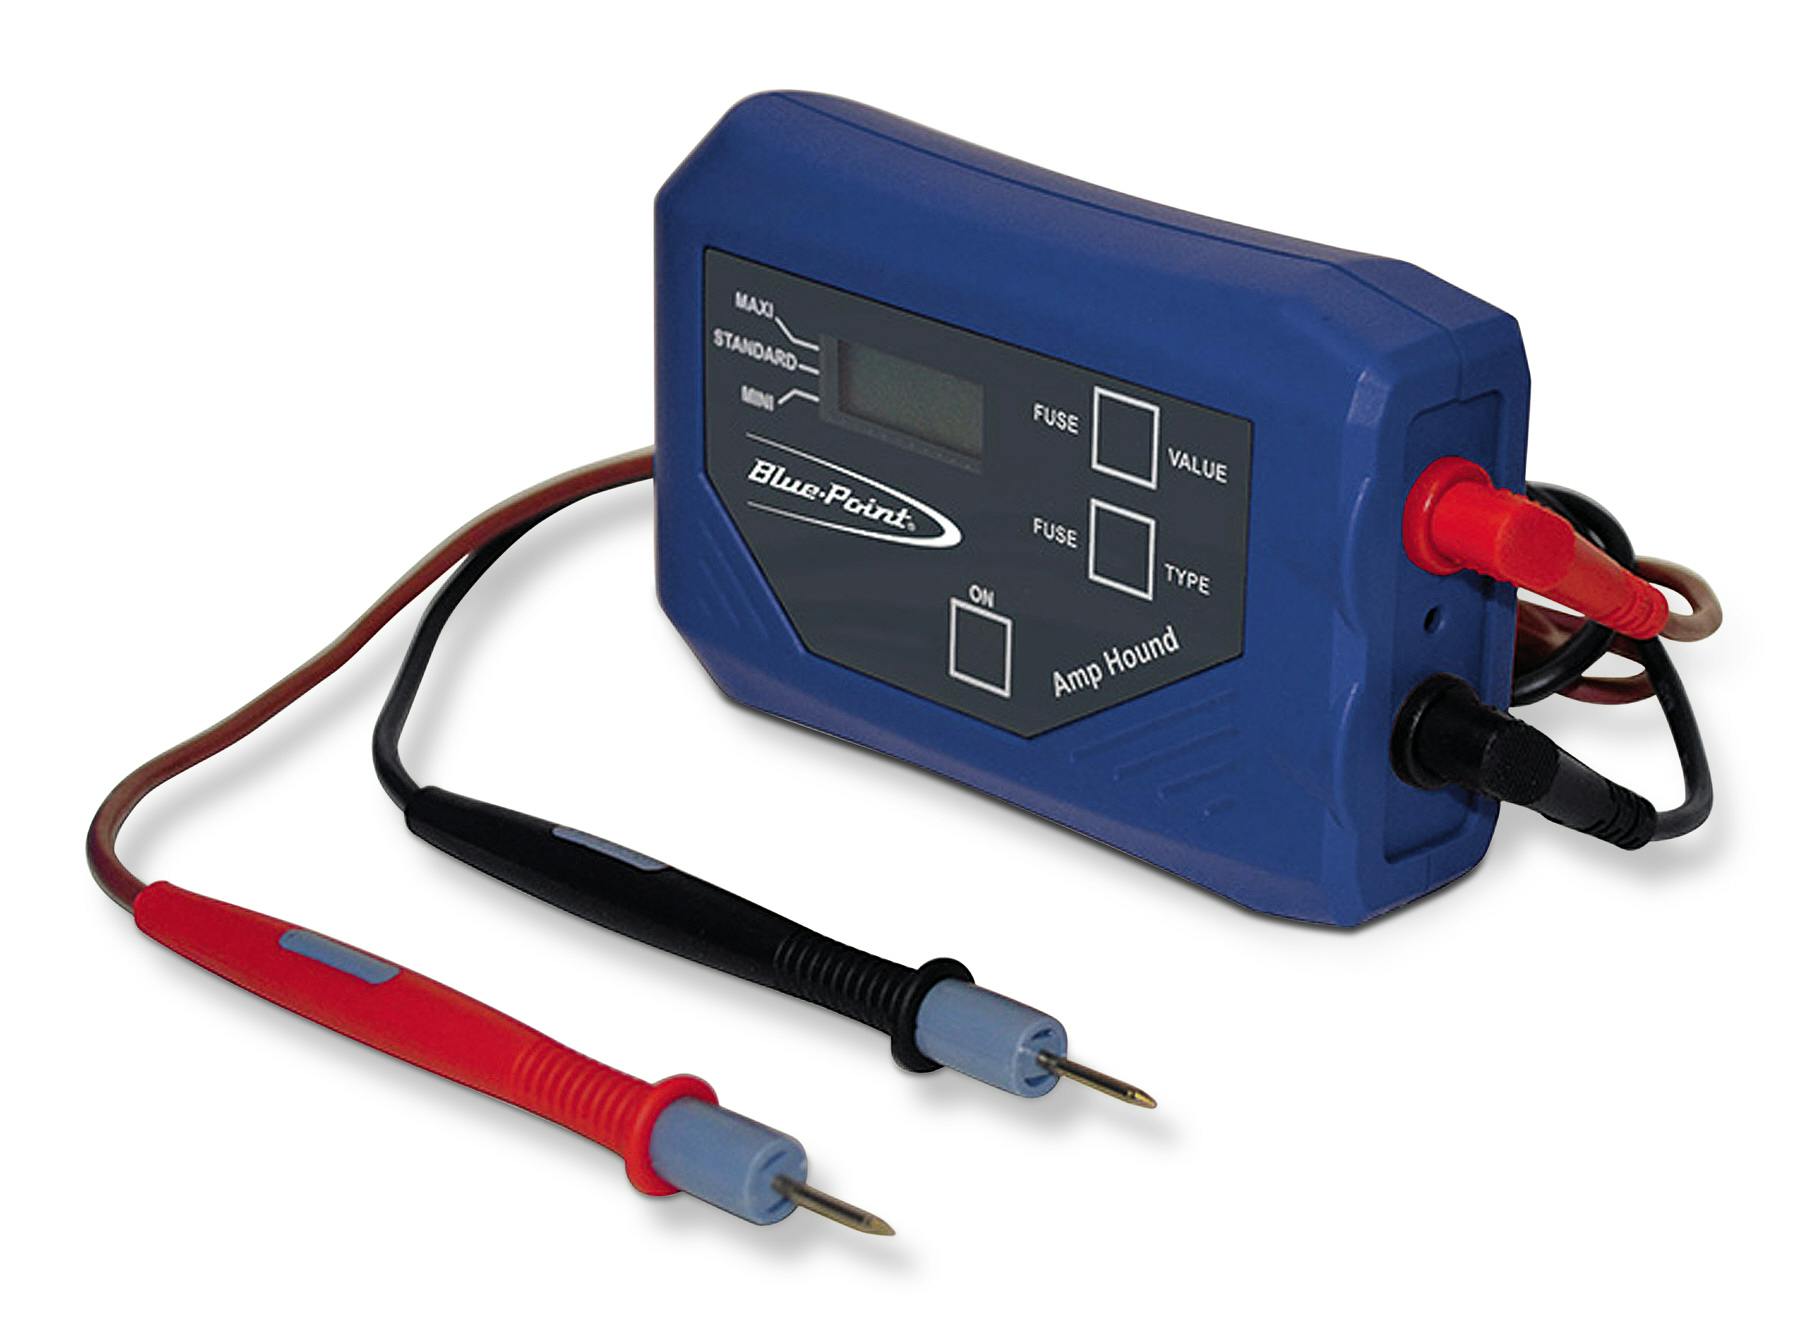 Amp Hound (Blue-Point®) | EECT74 | Snap-on Store